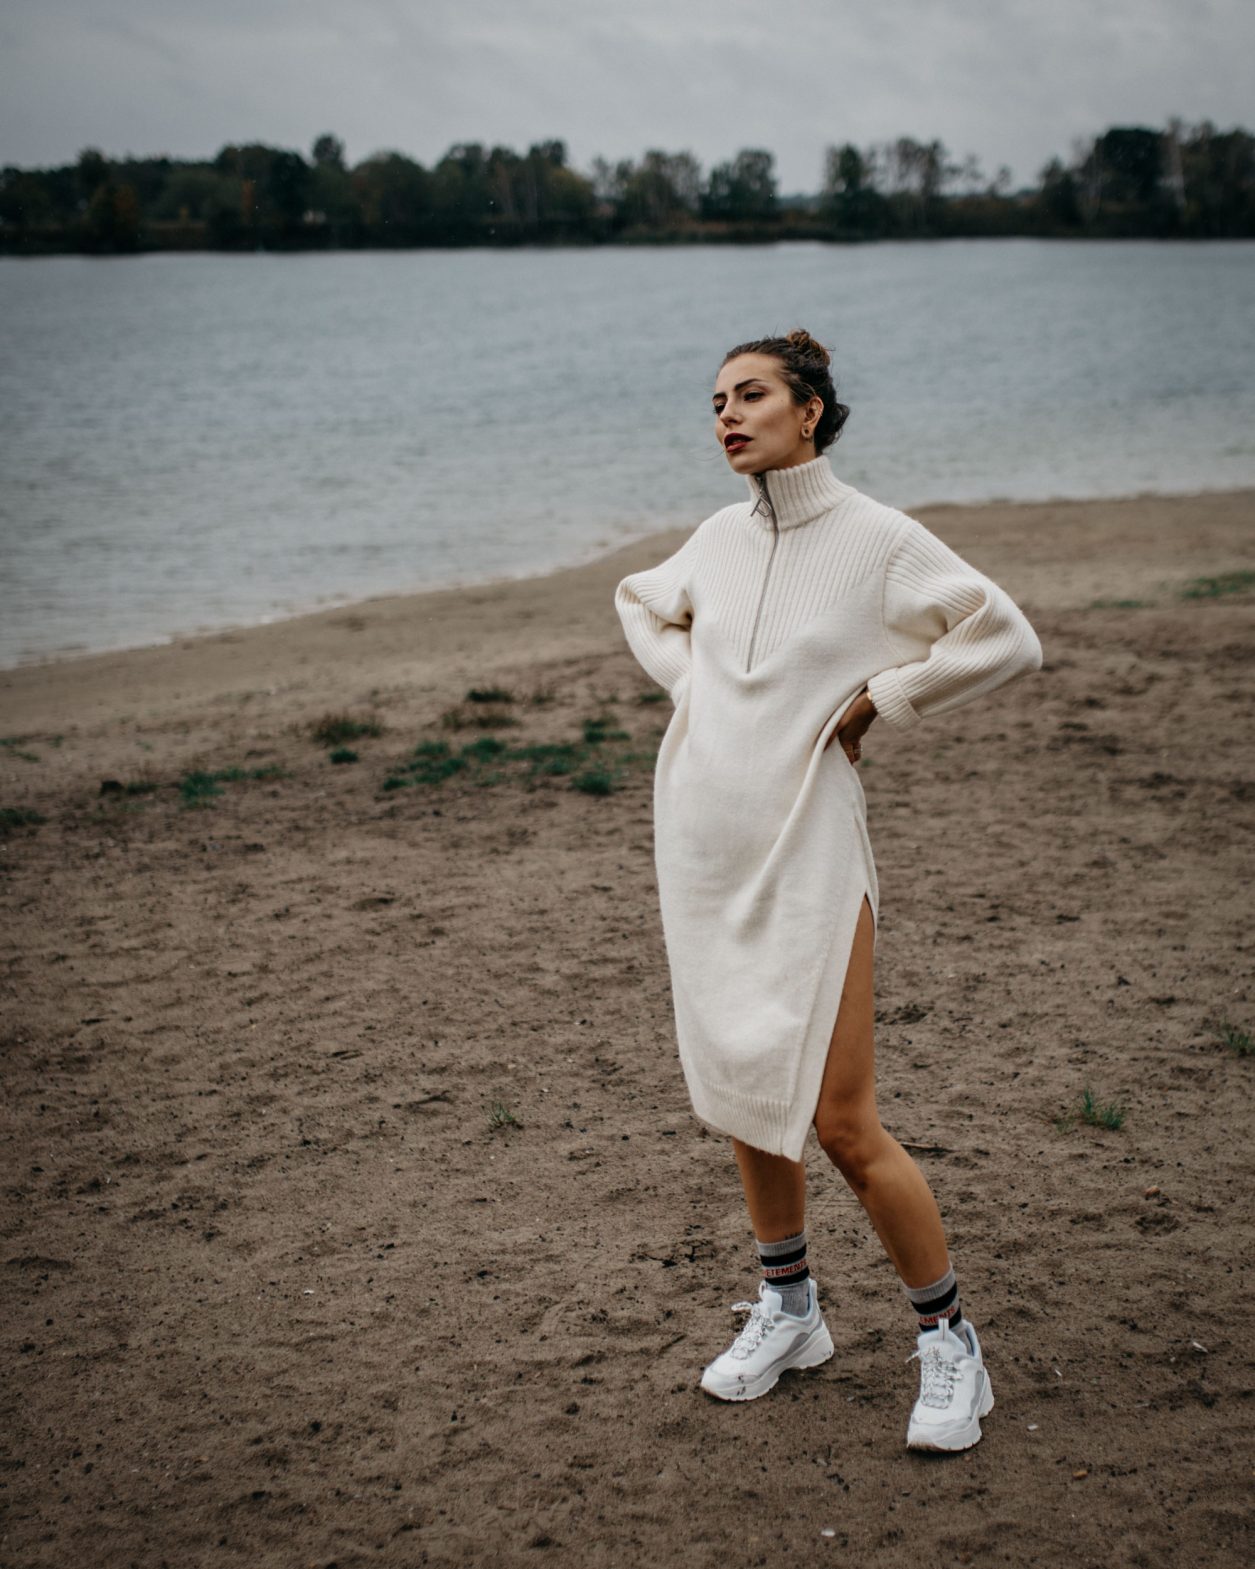 H&M x Pringle of Scotland | Design collection | 2019 | Autumn Winter | Editorial Shooting by Berlin based Fashion Blogger Masha Sedgwick | Lake Tegel | style: moody, comfy, clean 